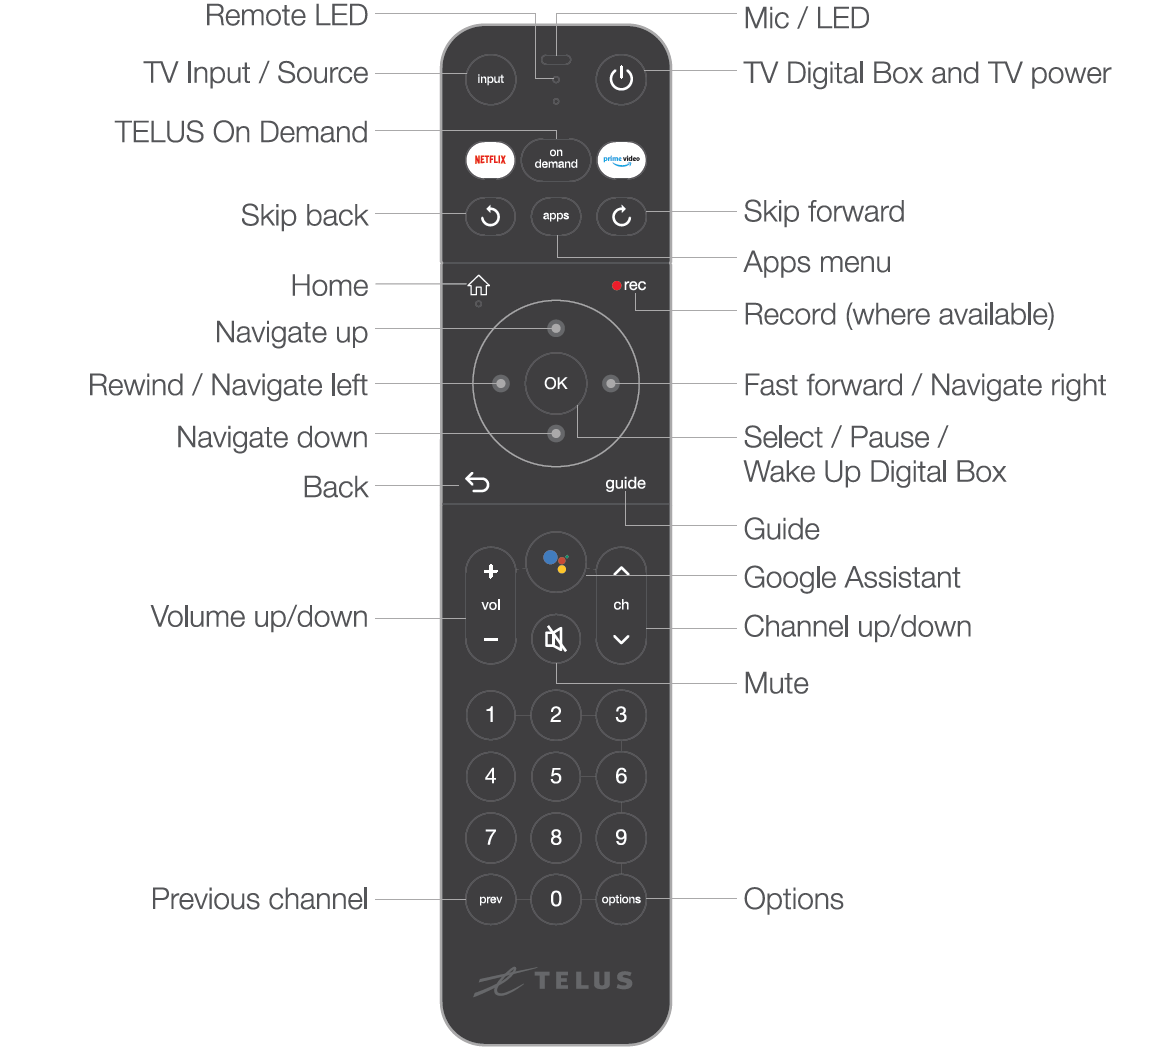 The TELUS TV Digital Box Remote is shown with text describing what each button does.